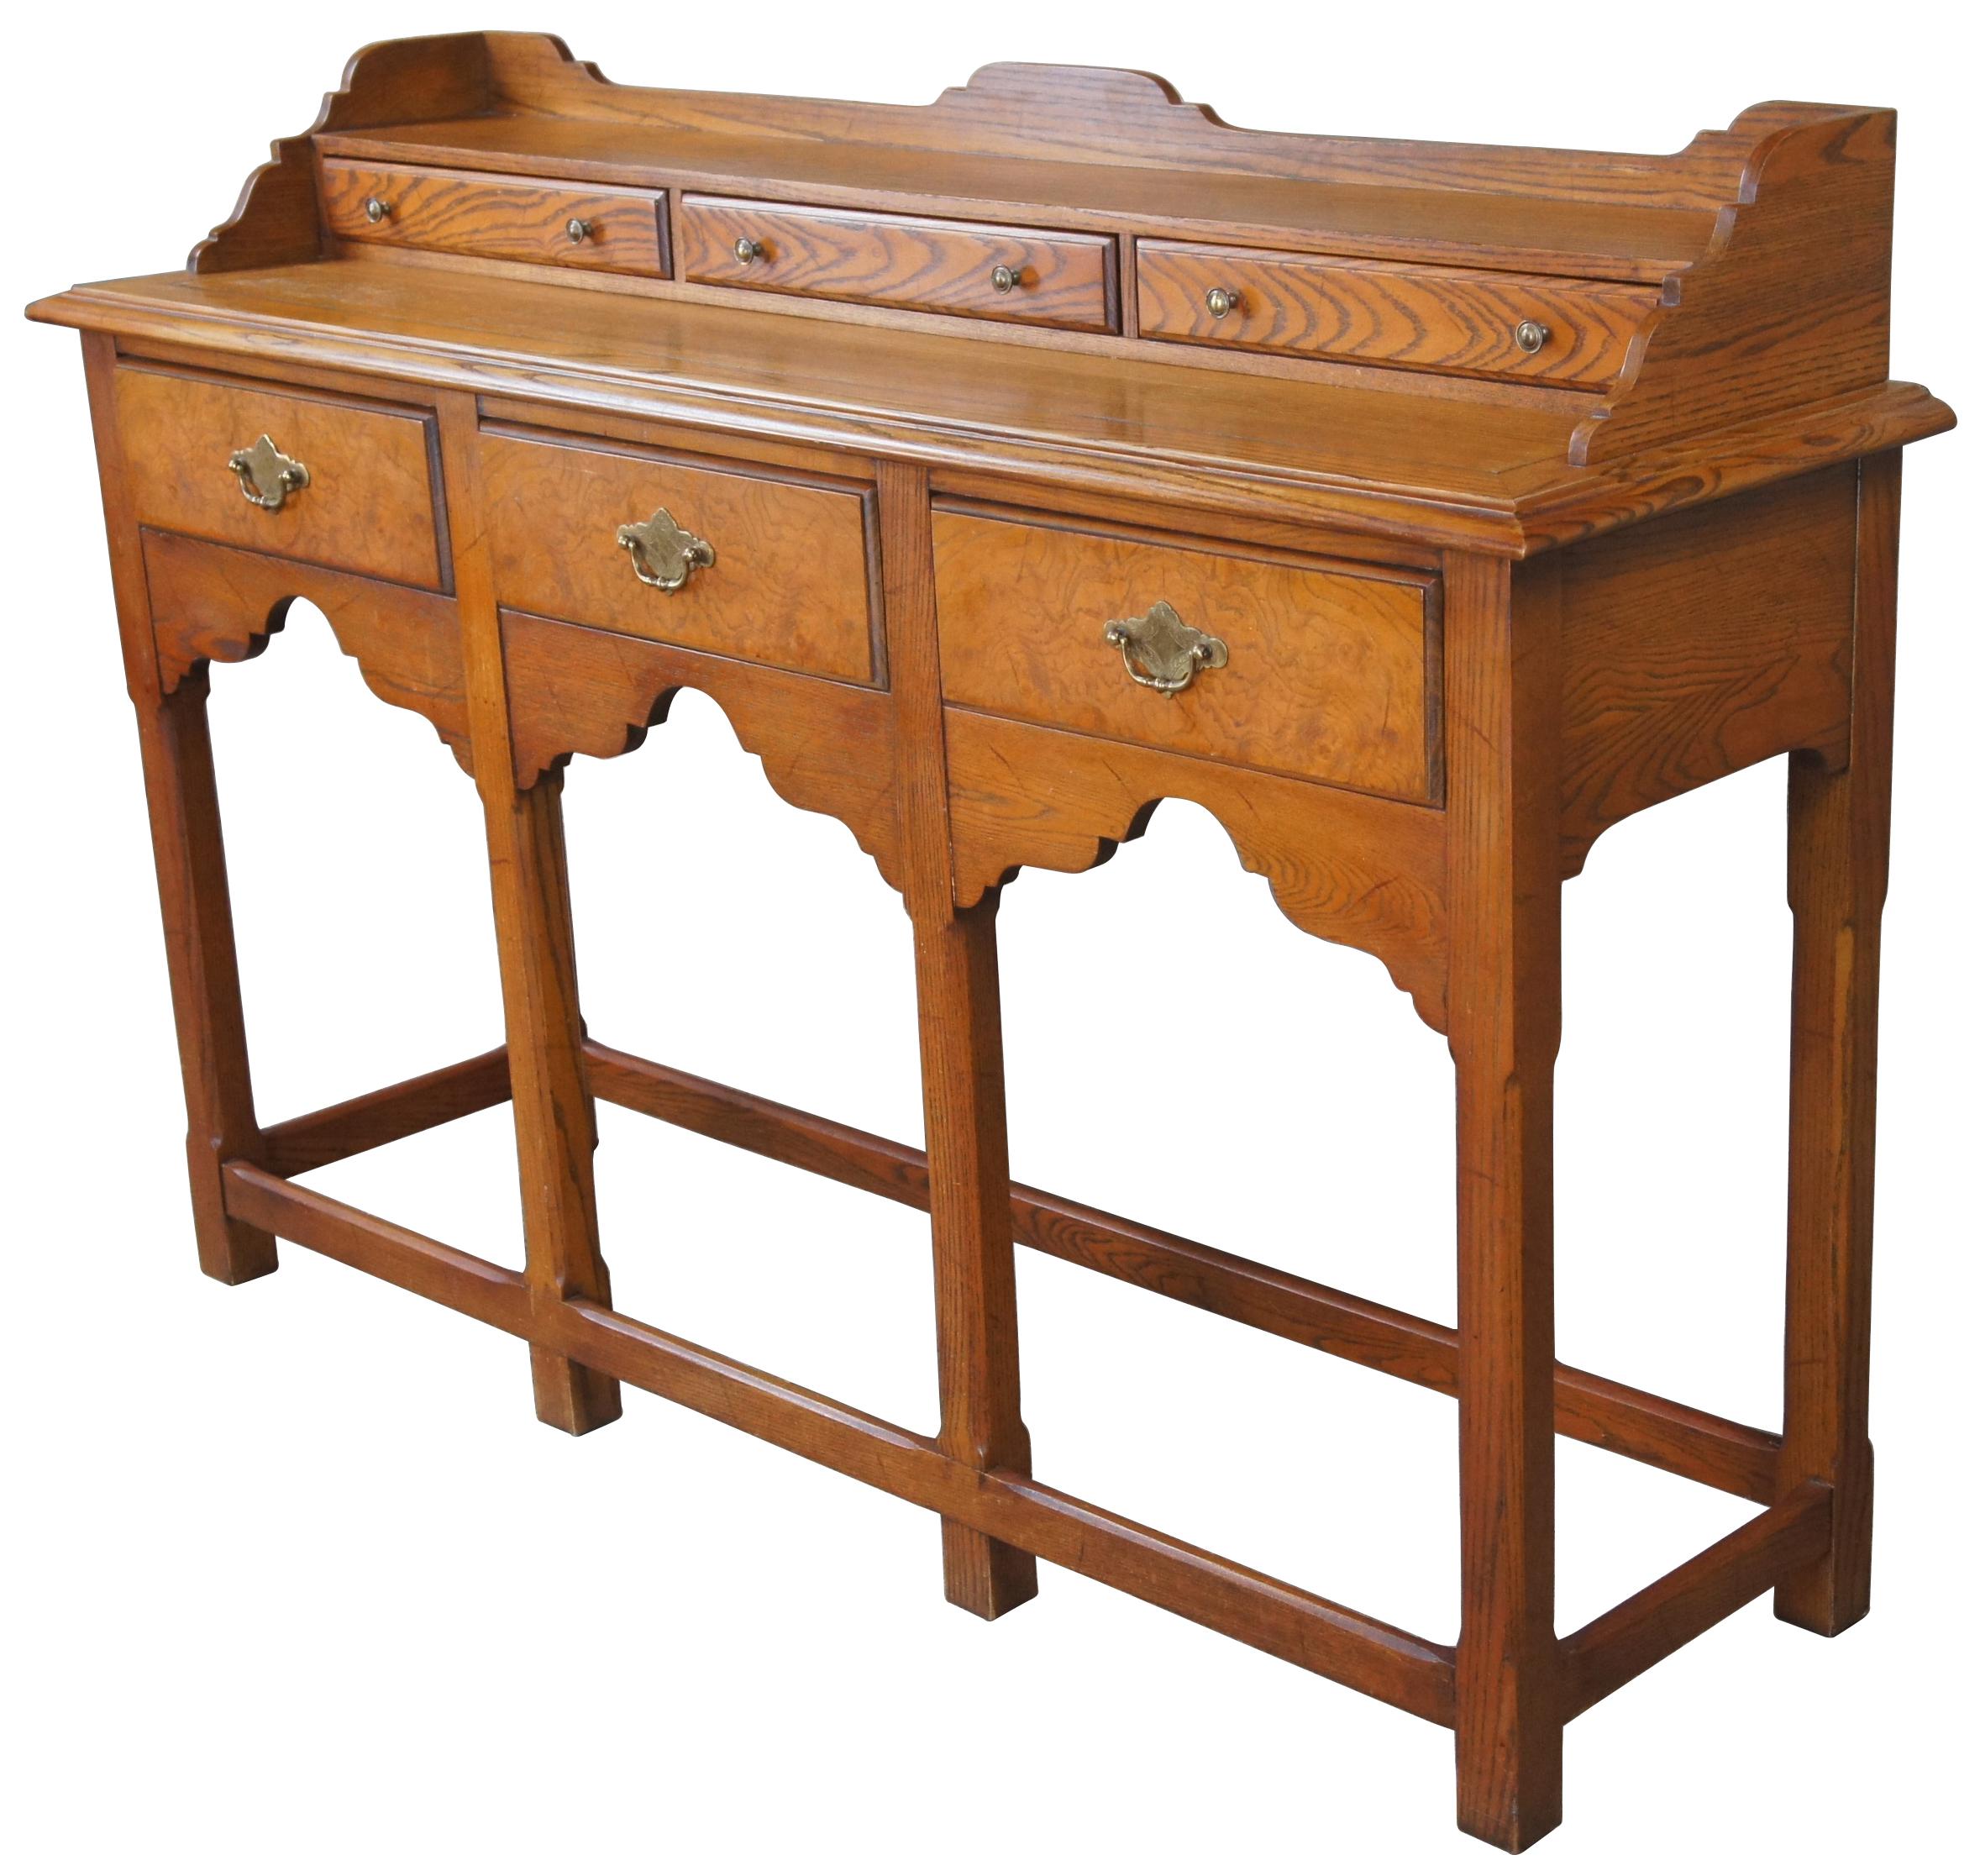 Hekman Furniture chinoiserie sideboard or hall table, circa 1970s. Made from oak with olive ash burled lower drawer fronts and brass hardware. Features a stepback design with upper drawers for storage and shaped backsplash. Supported by six straight